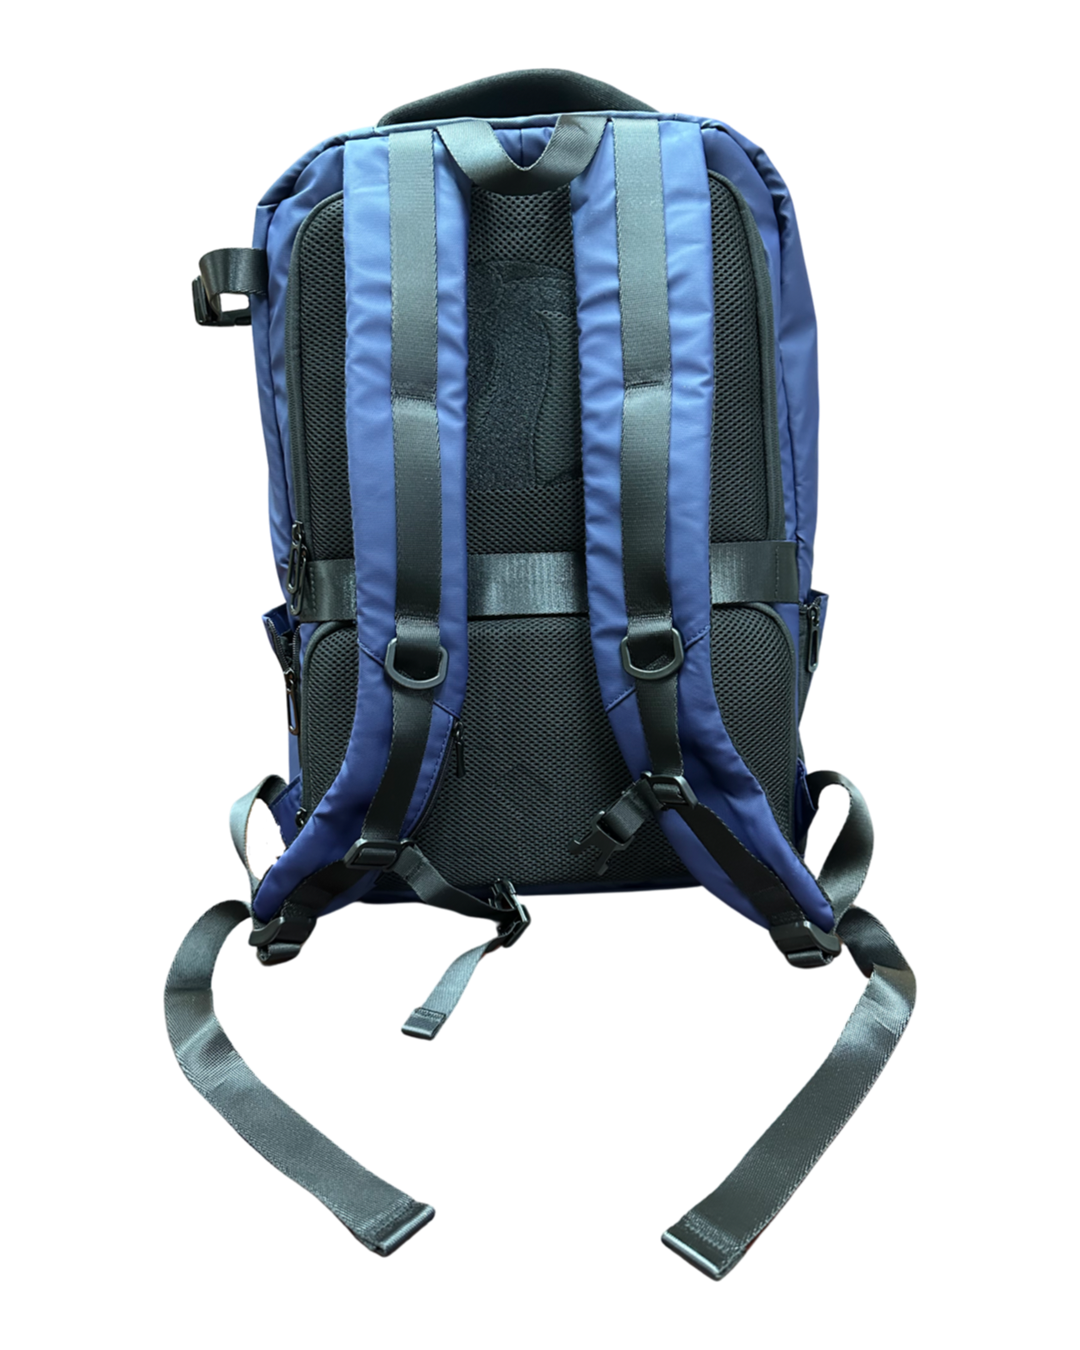 Imperium Armor - Shield Backpack 2.0 "XL" - Navy